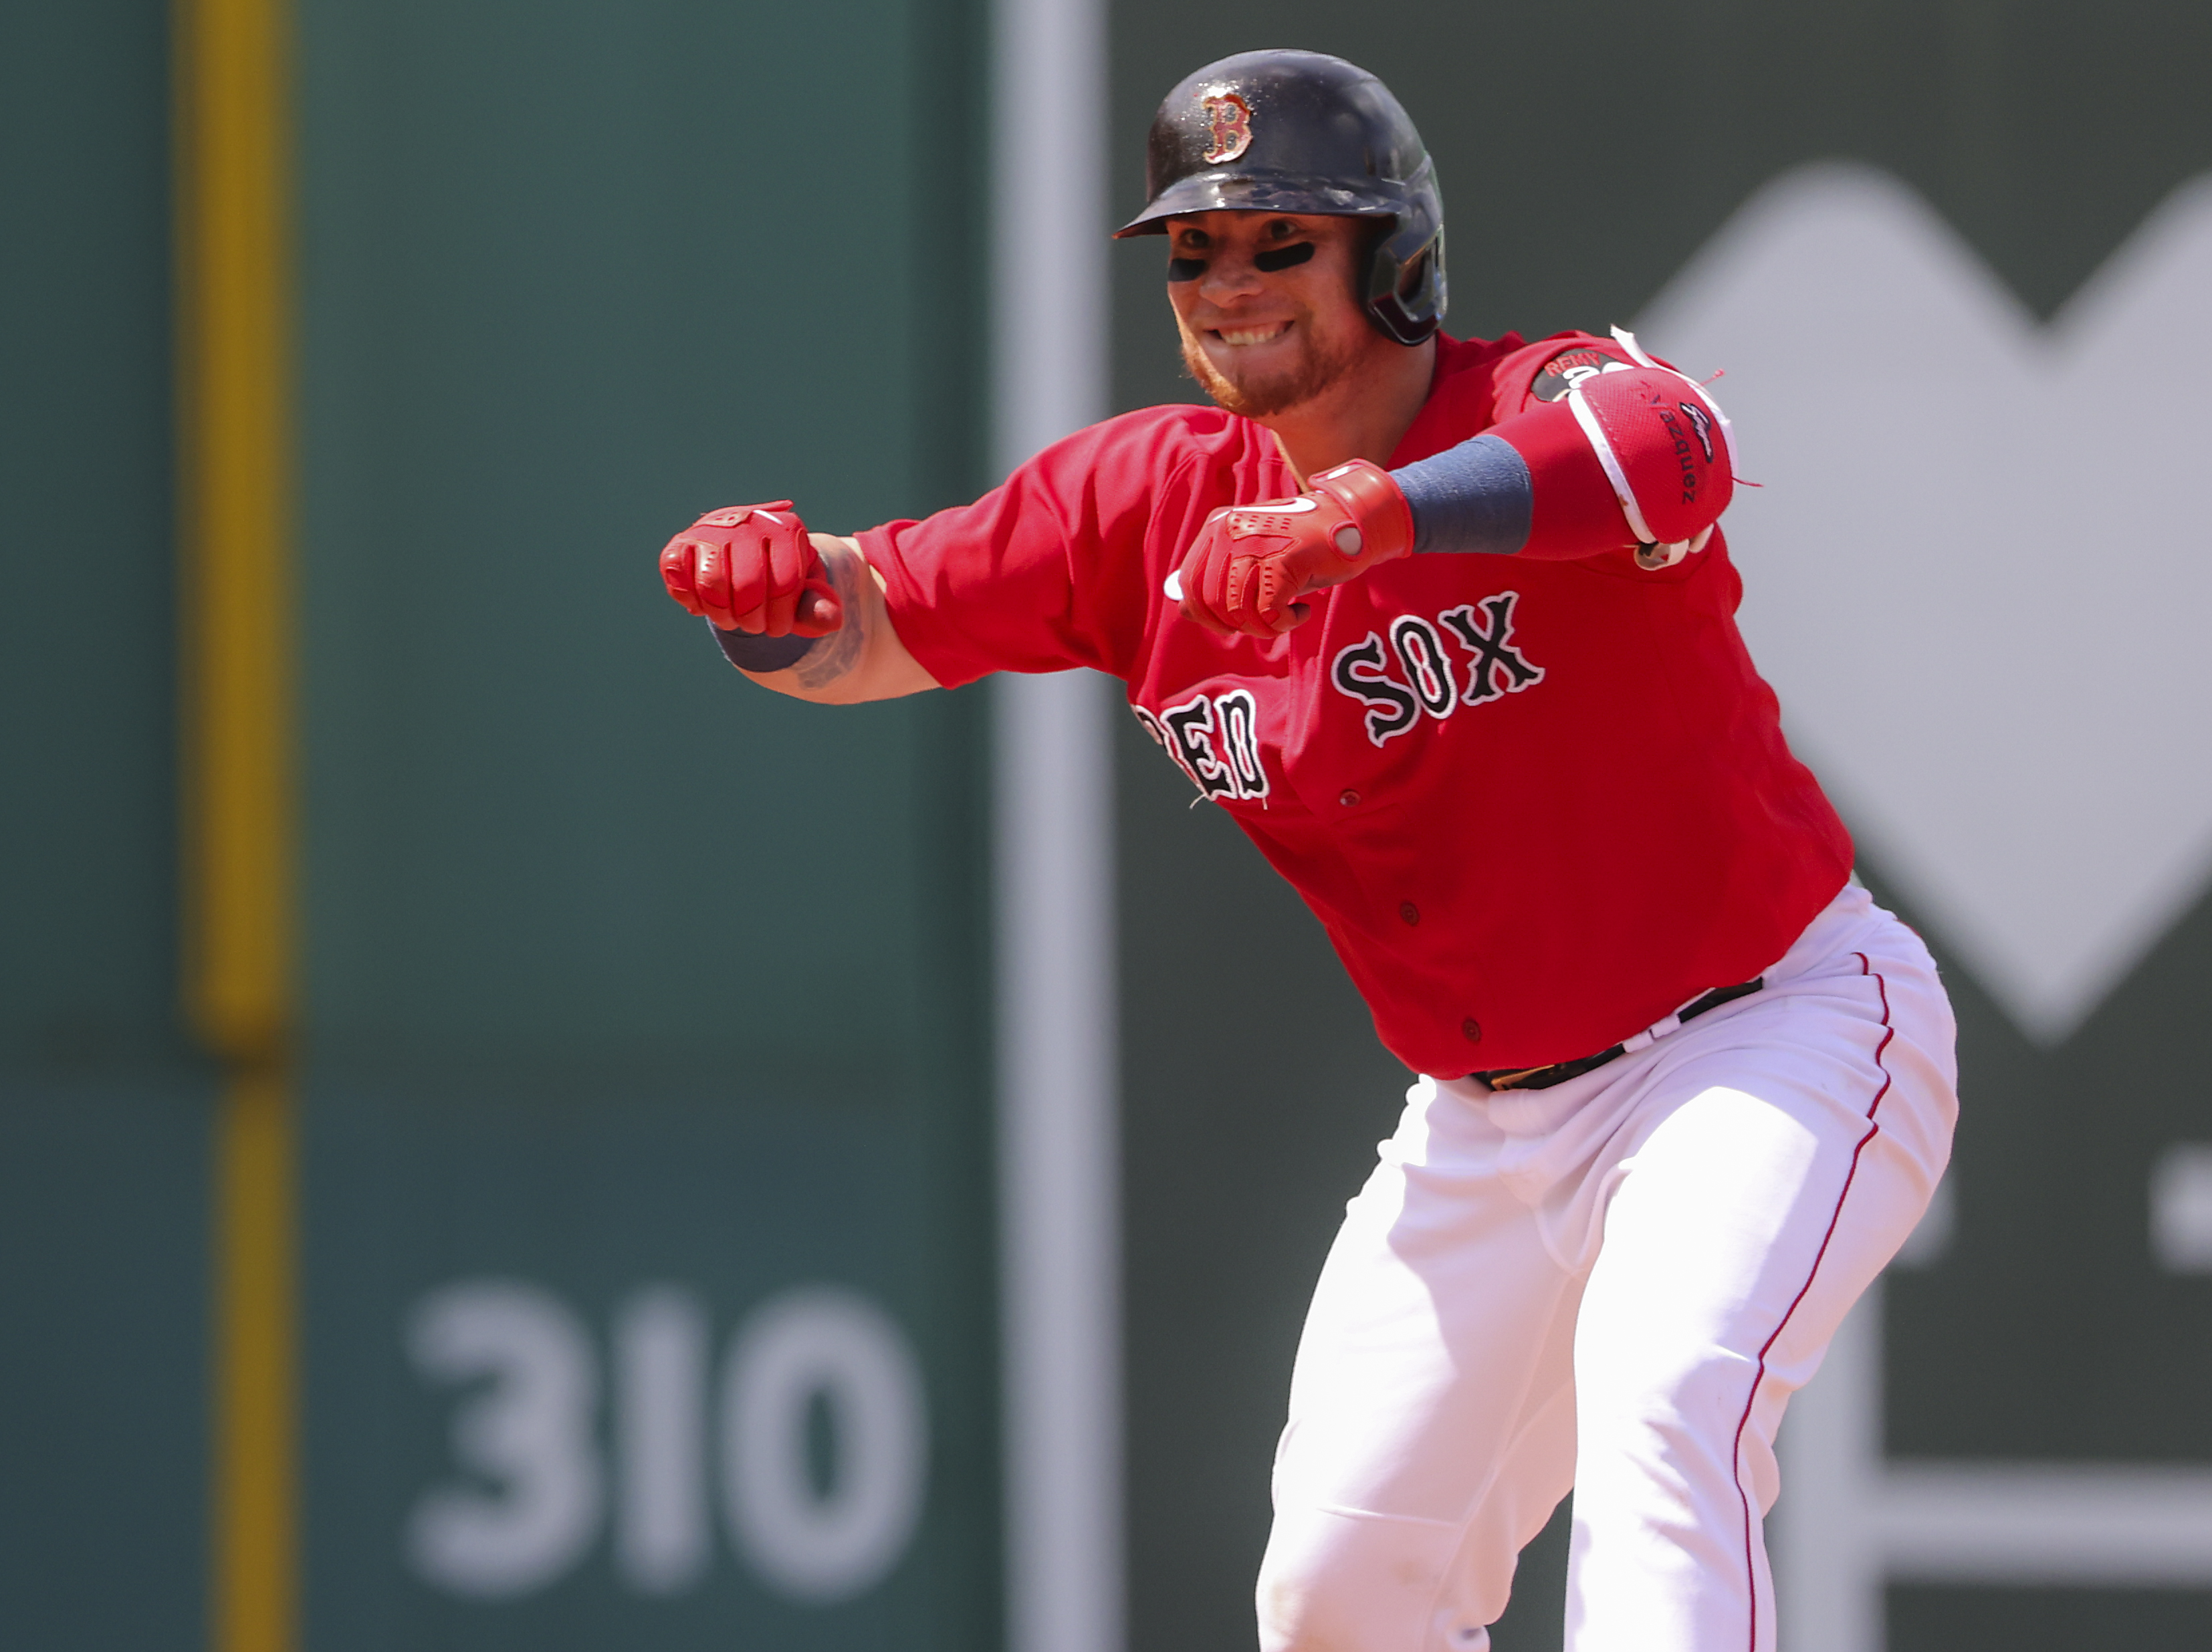 Christian Vazquez say goodbye to 'extended family' Red Sox after trade to  Astros 